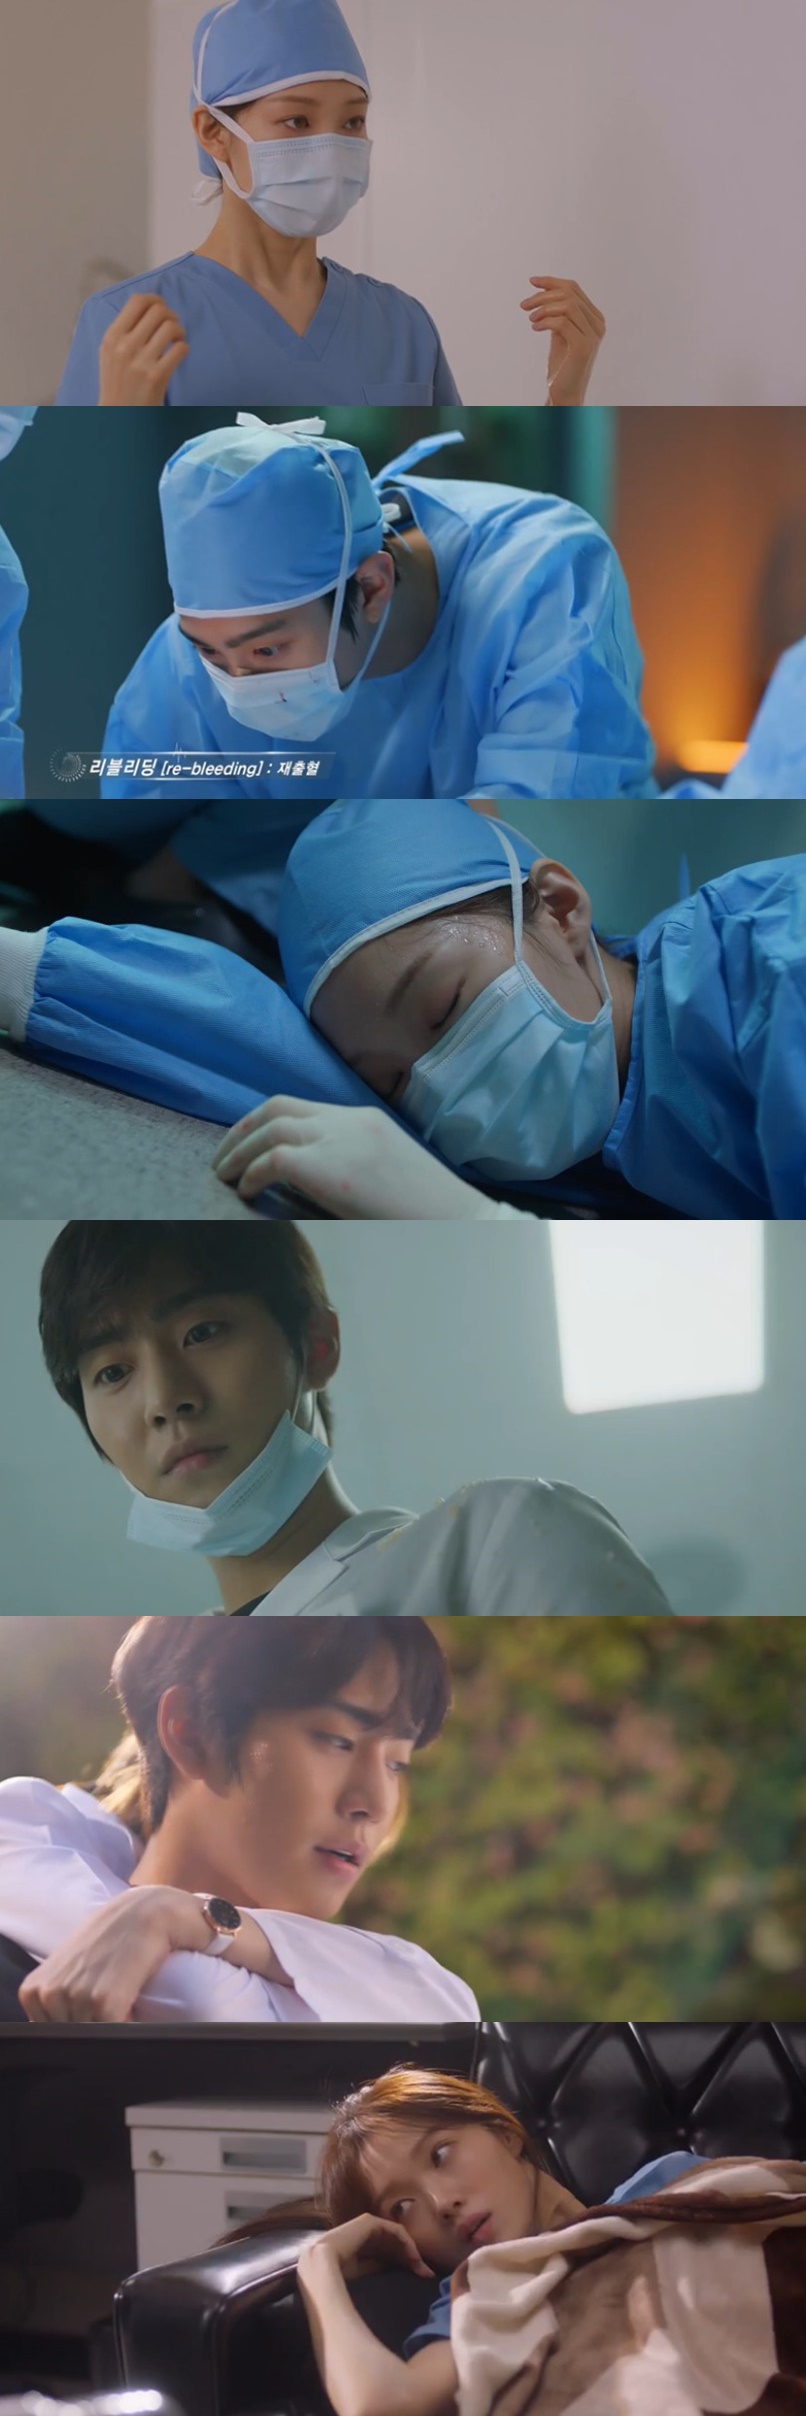 In Romantic Doctor Kim Sabu 2, Lee Sung-kyung was written in a surgical mask apex in-road.In the first broadcast of SBS drama Romantic Doctor Kim Sabu 2 broadcast on the 6th, Cha Eun-jae, who eats Neuro-linguistic programming stabilizers due to trauma, was revealed.Cha Eun-jae, who was told that Kim Sabu was chewing dog shit, showed Kim Sabus neuro-linguistic programming.Cha took a big deep breath before entering the Surgical mask room.Never sleep this time, and if you sleep again next time, you are permanently expelled, said Apex, looking at Cha Eun-jae.Cha Eun-jae, who was in charge of the Surgical mask combine, took the Neuro-linguistic programming stabilizer and entered the Surgical mask room, which Park Eun-tak is in charge of.Cha Eun-jae, who was not able to concentrate on the surgical mask because of the drowsiness of the in-road which was doing the surgical mask, was embarrassed.During the surgical mask, the fallen tea fell asleep. Kim Sabu, who watched the surgical mask process of Seo Woo-jin and Cha Eun-jae, laughed bitterly.Cha Eun-jae and Park Eun-tak shared an anatomy lecture while they were undergraduates. Cha Eun-jae, who was practicing anatomy, was used vomiting.Park Eun-tak, who ran with such a tea, asked, Is everything okay? And Cha Eun-jae burst into tears.Professor Professor Lee, who learned that he was taking a Neuro-linguistic programming stabilizer, said, How do thoracic surgeons eat Neuro-linguistic programming stabilizers?Its a stone wall hospital in Jeongseon.